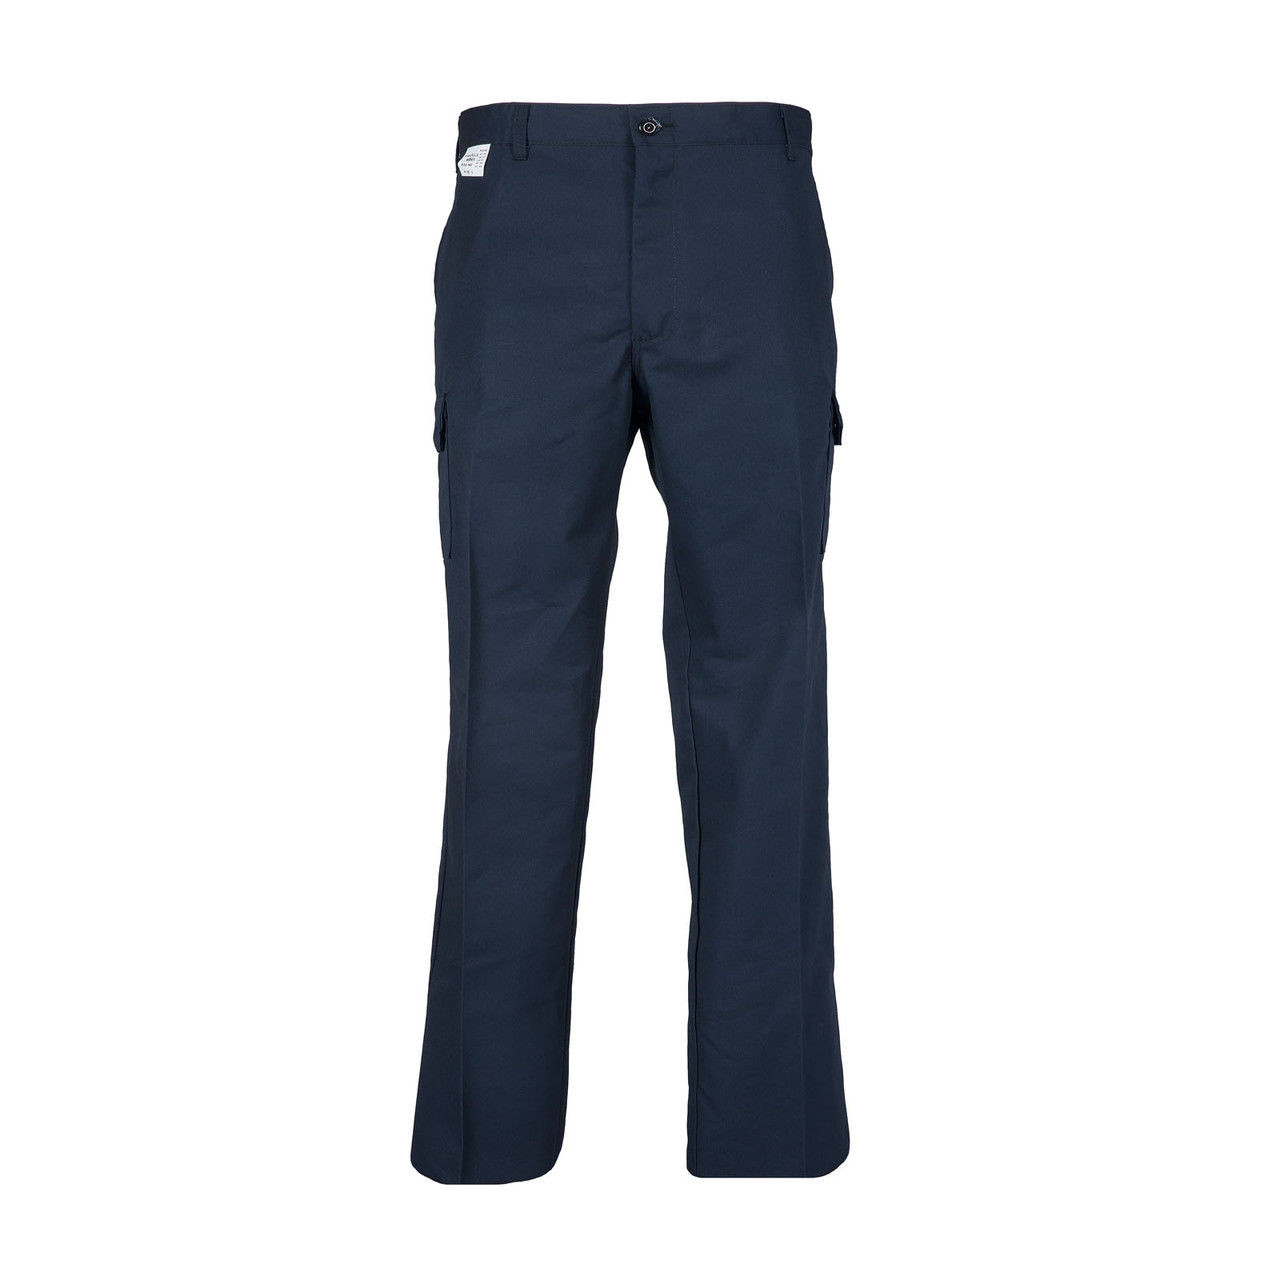 Royal Cargo Pants With Button Closure & Multiple Pockets